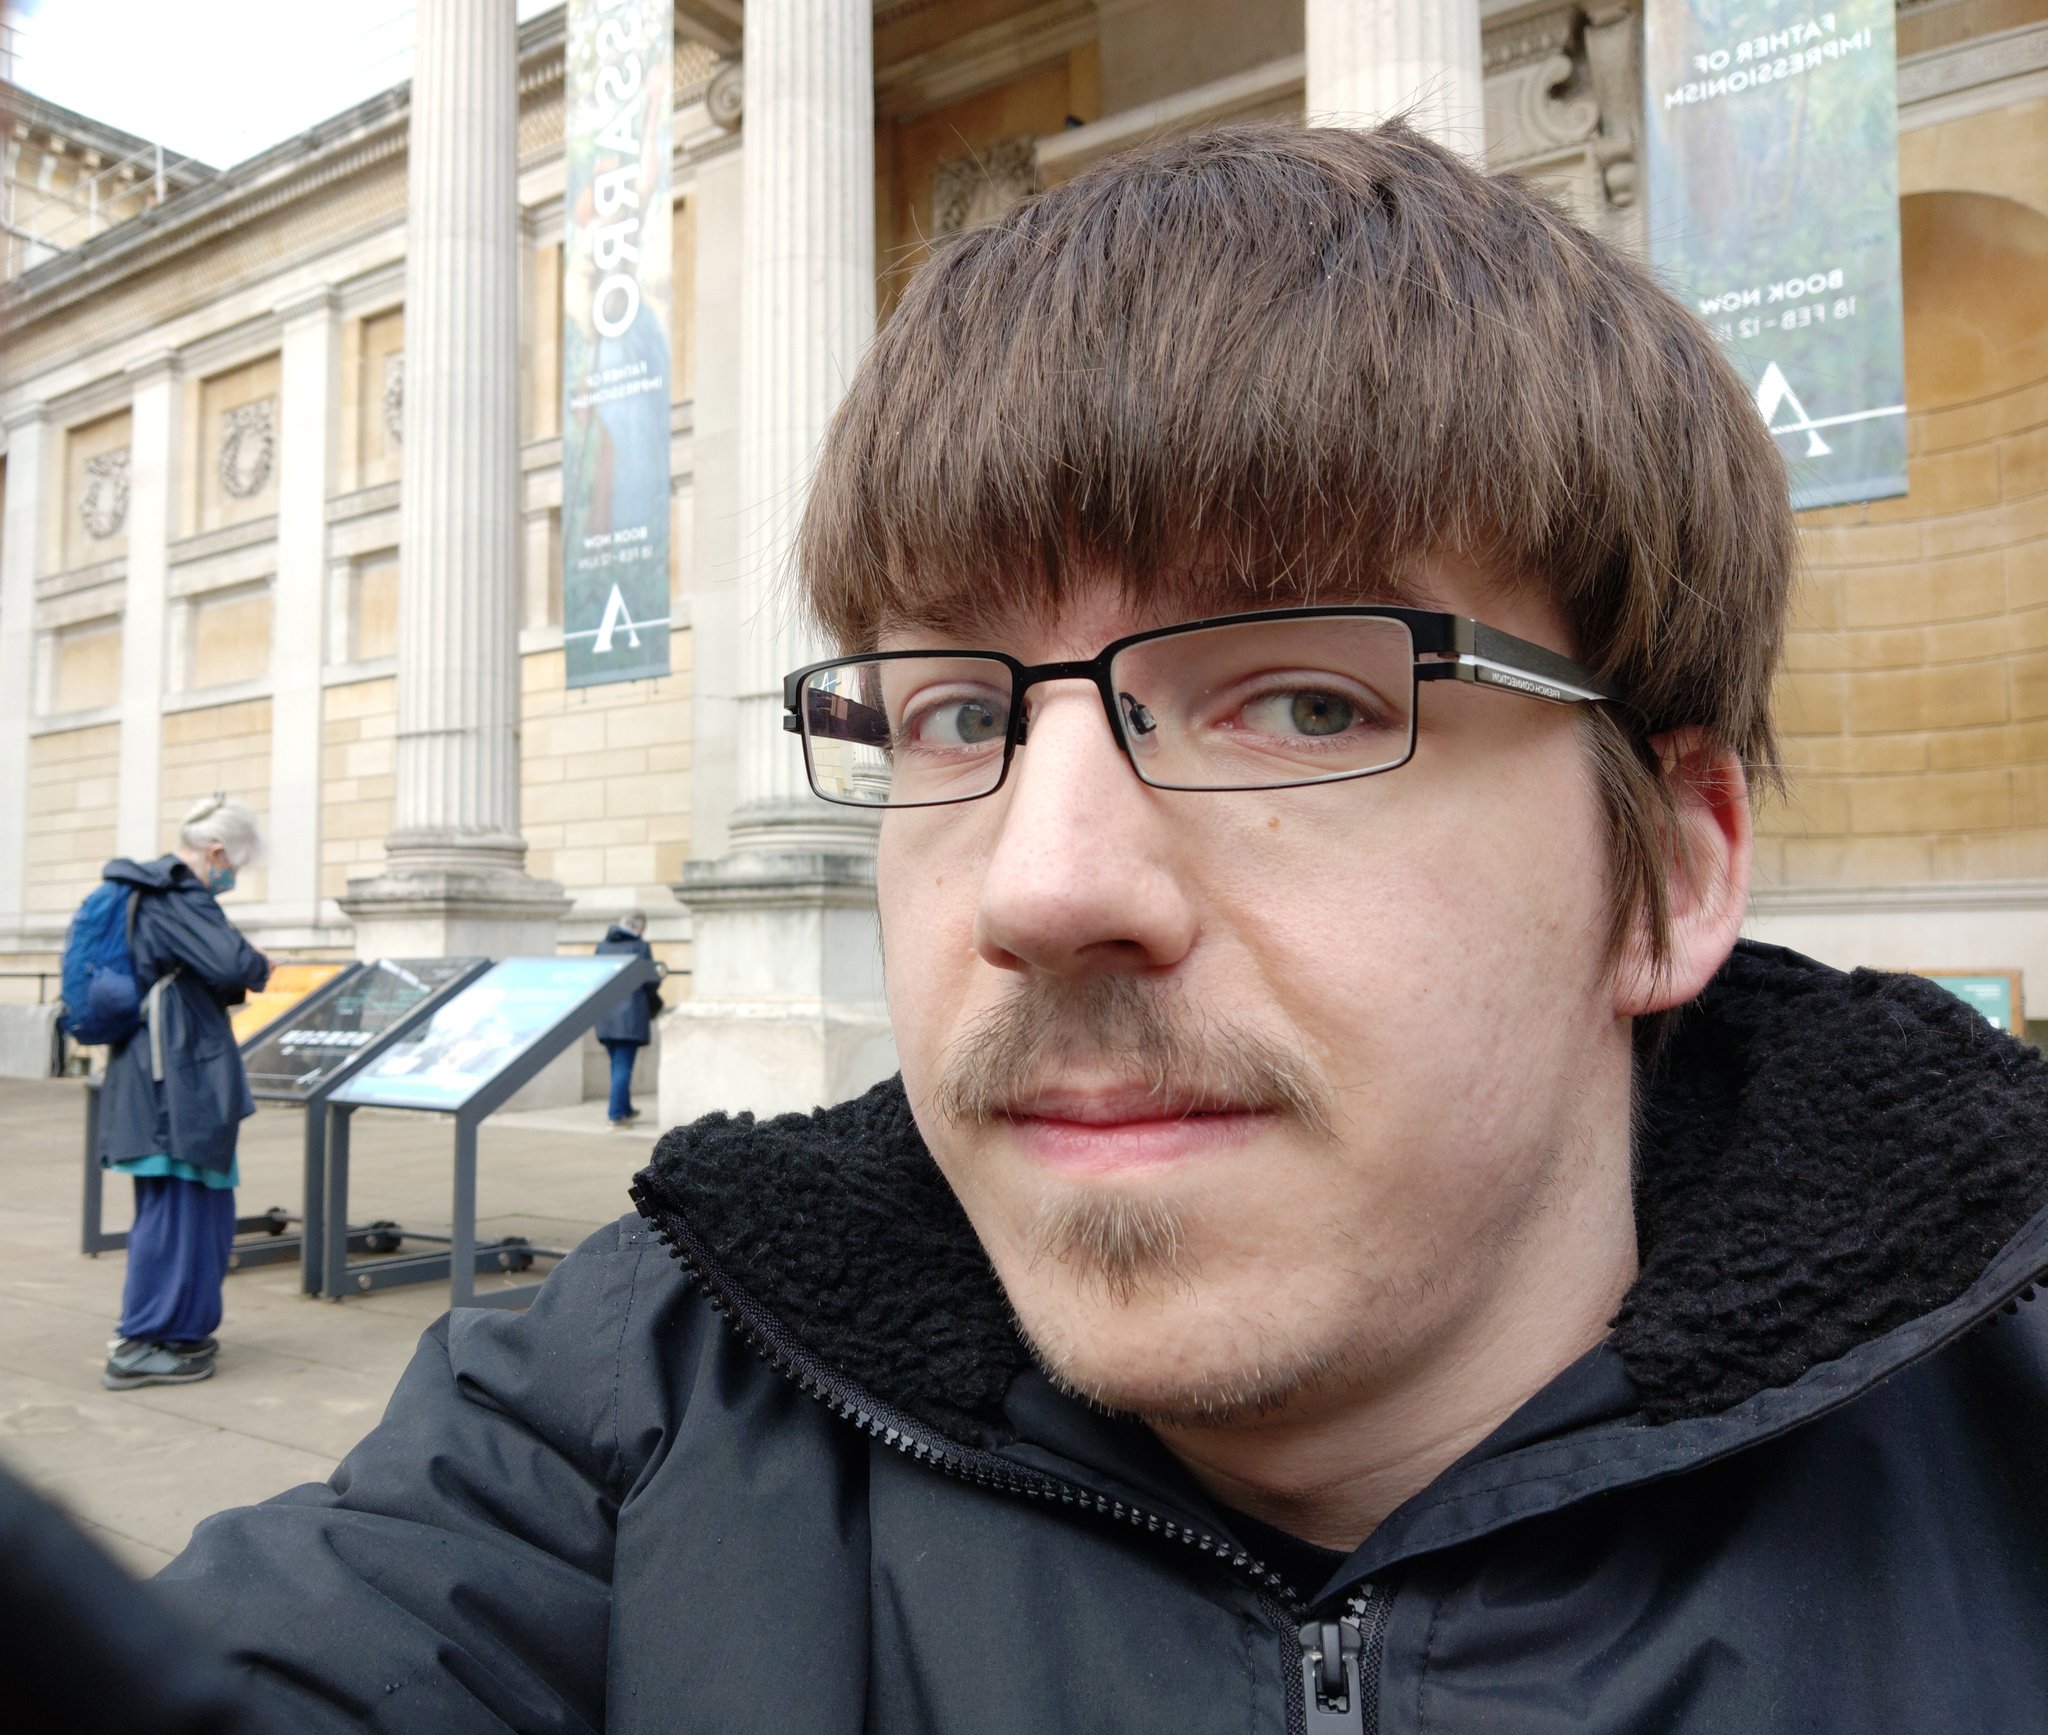 Kyle is a young man in glasses with moustache in front of doric columns of Ashmolean Museum.